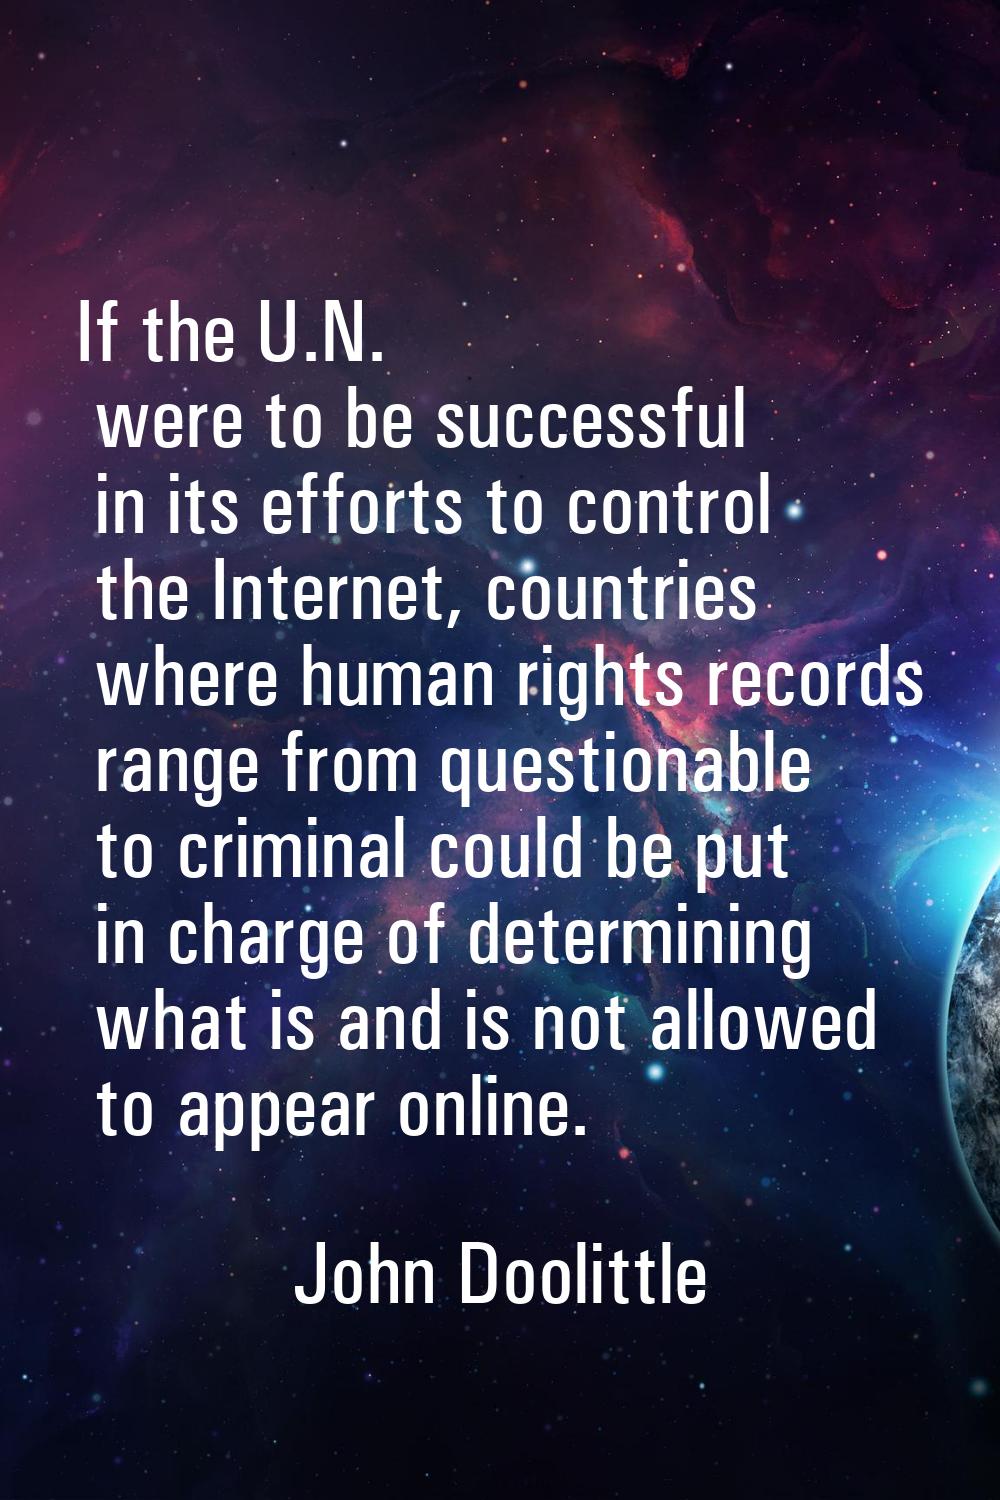 If the U.N. were to be successful in its efforts to control the Internet, countries where human rig